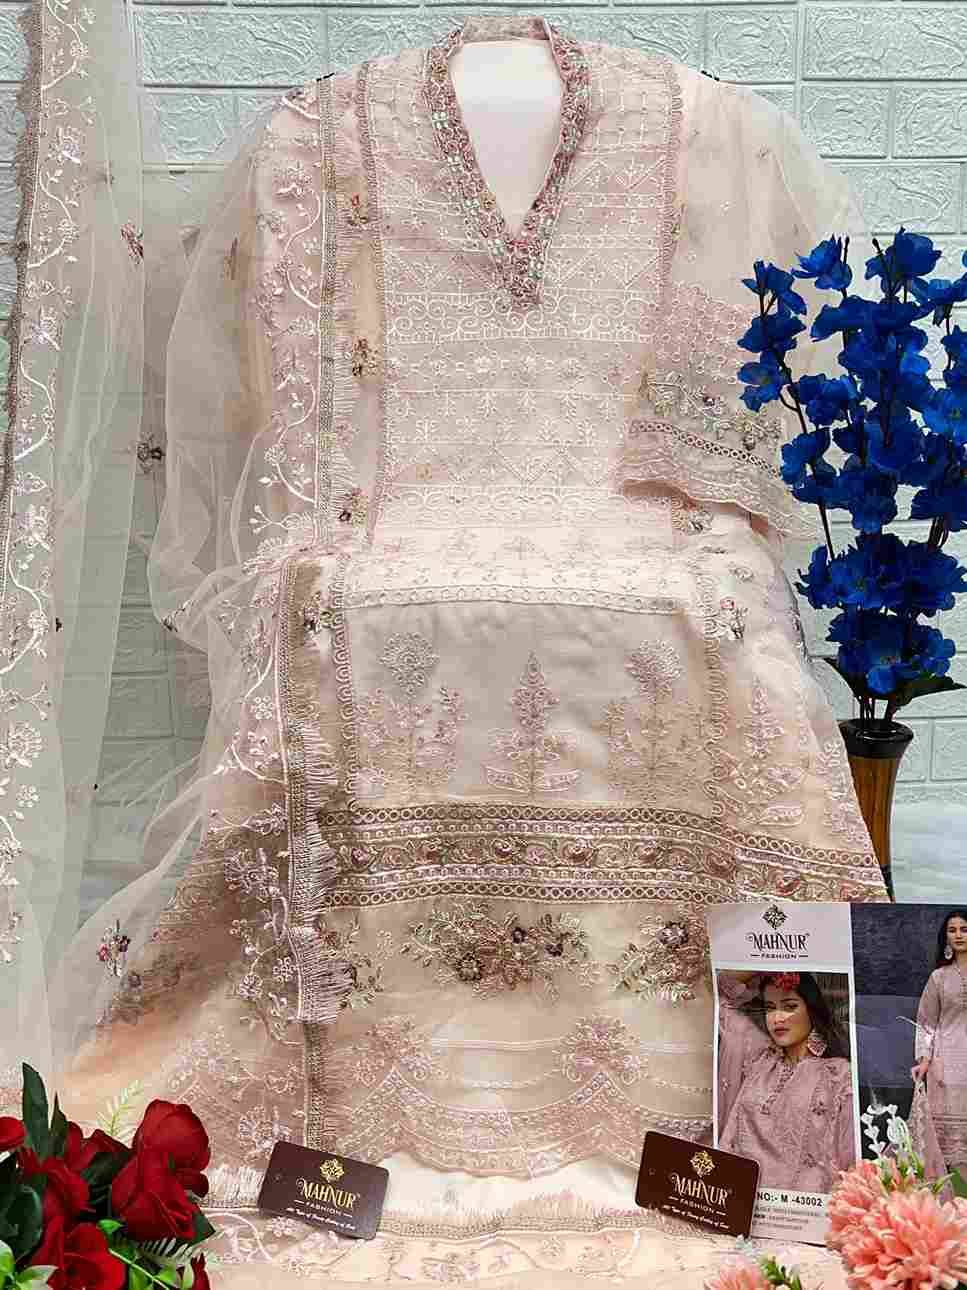 Mahnur Vol-43 By Mahnur Fashion 43001 To 43002 Series Beautiful Pakistani Suits Colorful Stylish Fancy Casual Wear & Ethnic Wear Organza  Dresses At Wholesale Price